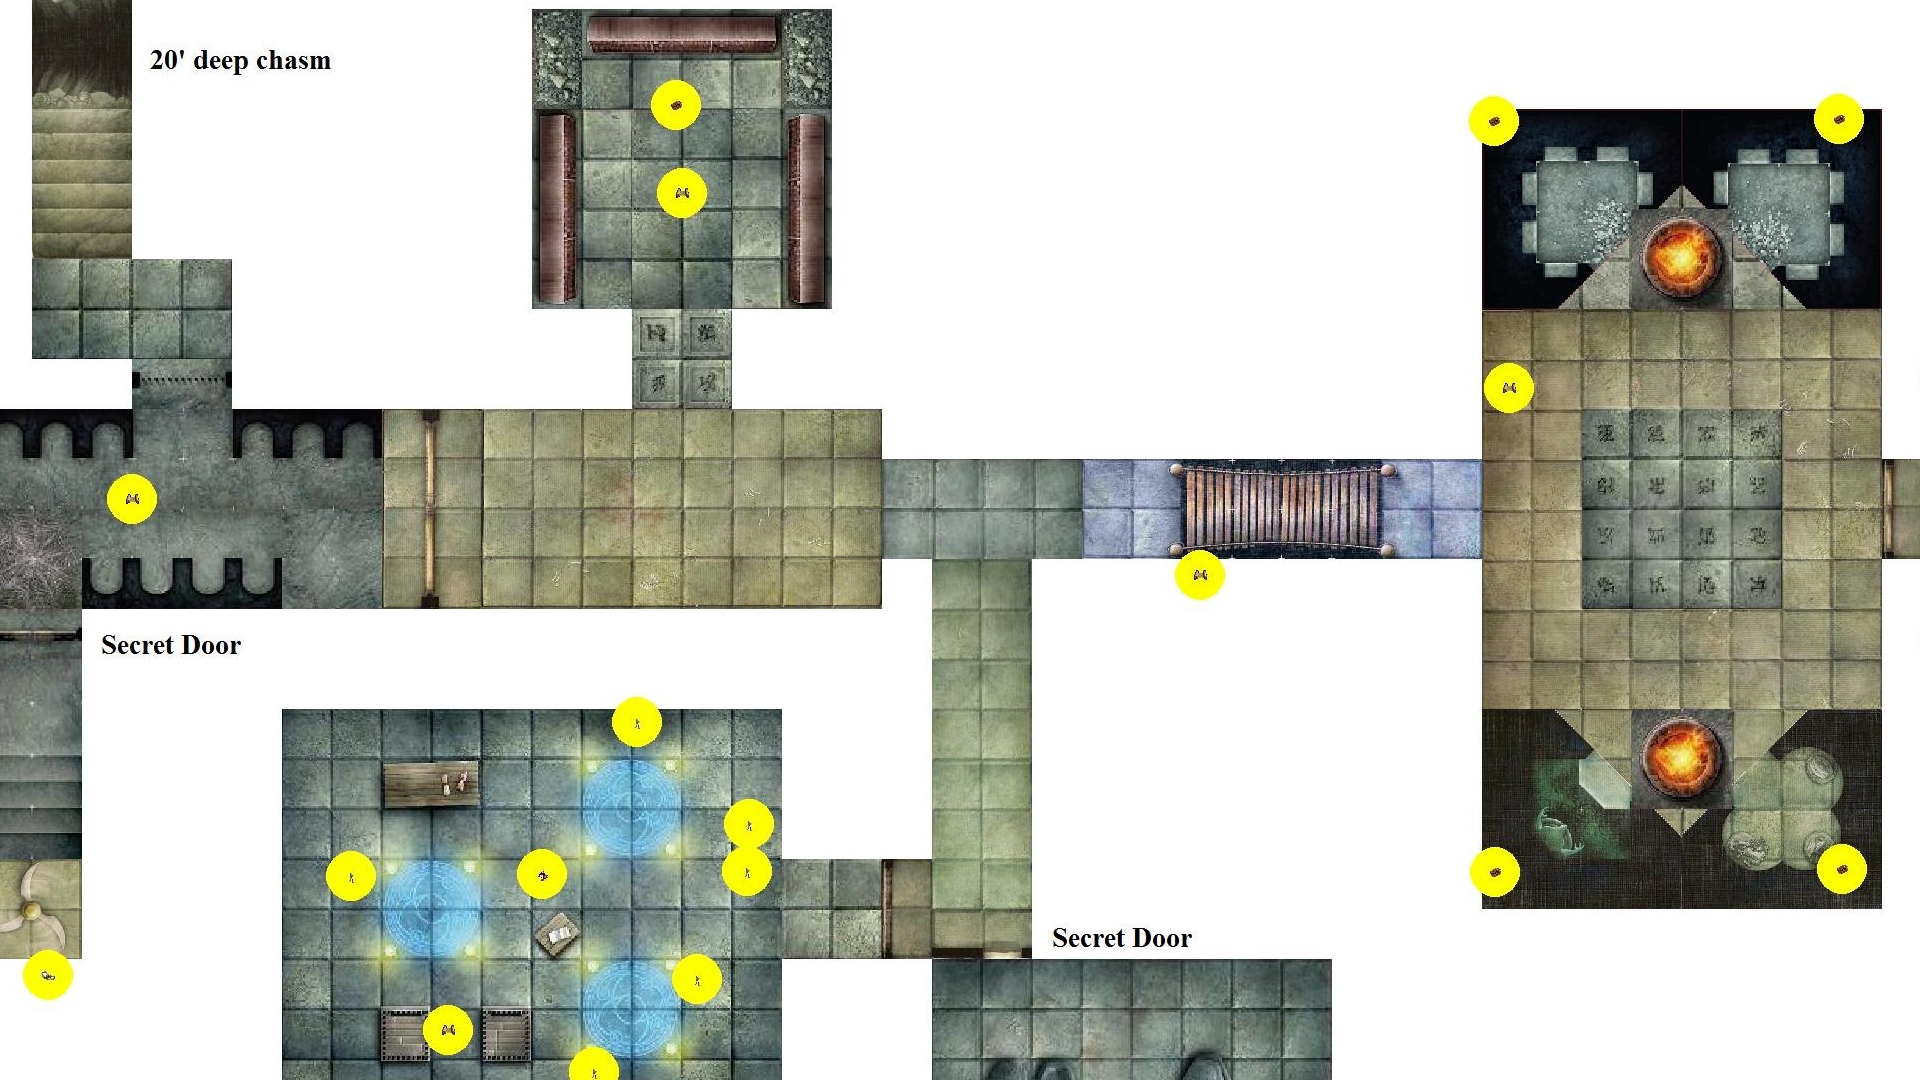 DnD maps and best DnD map makers: Author screenshot showing a DnD map from the Pymapper map maker